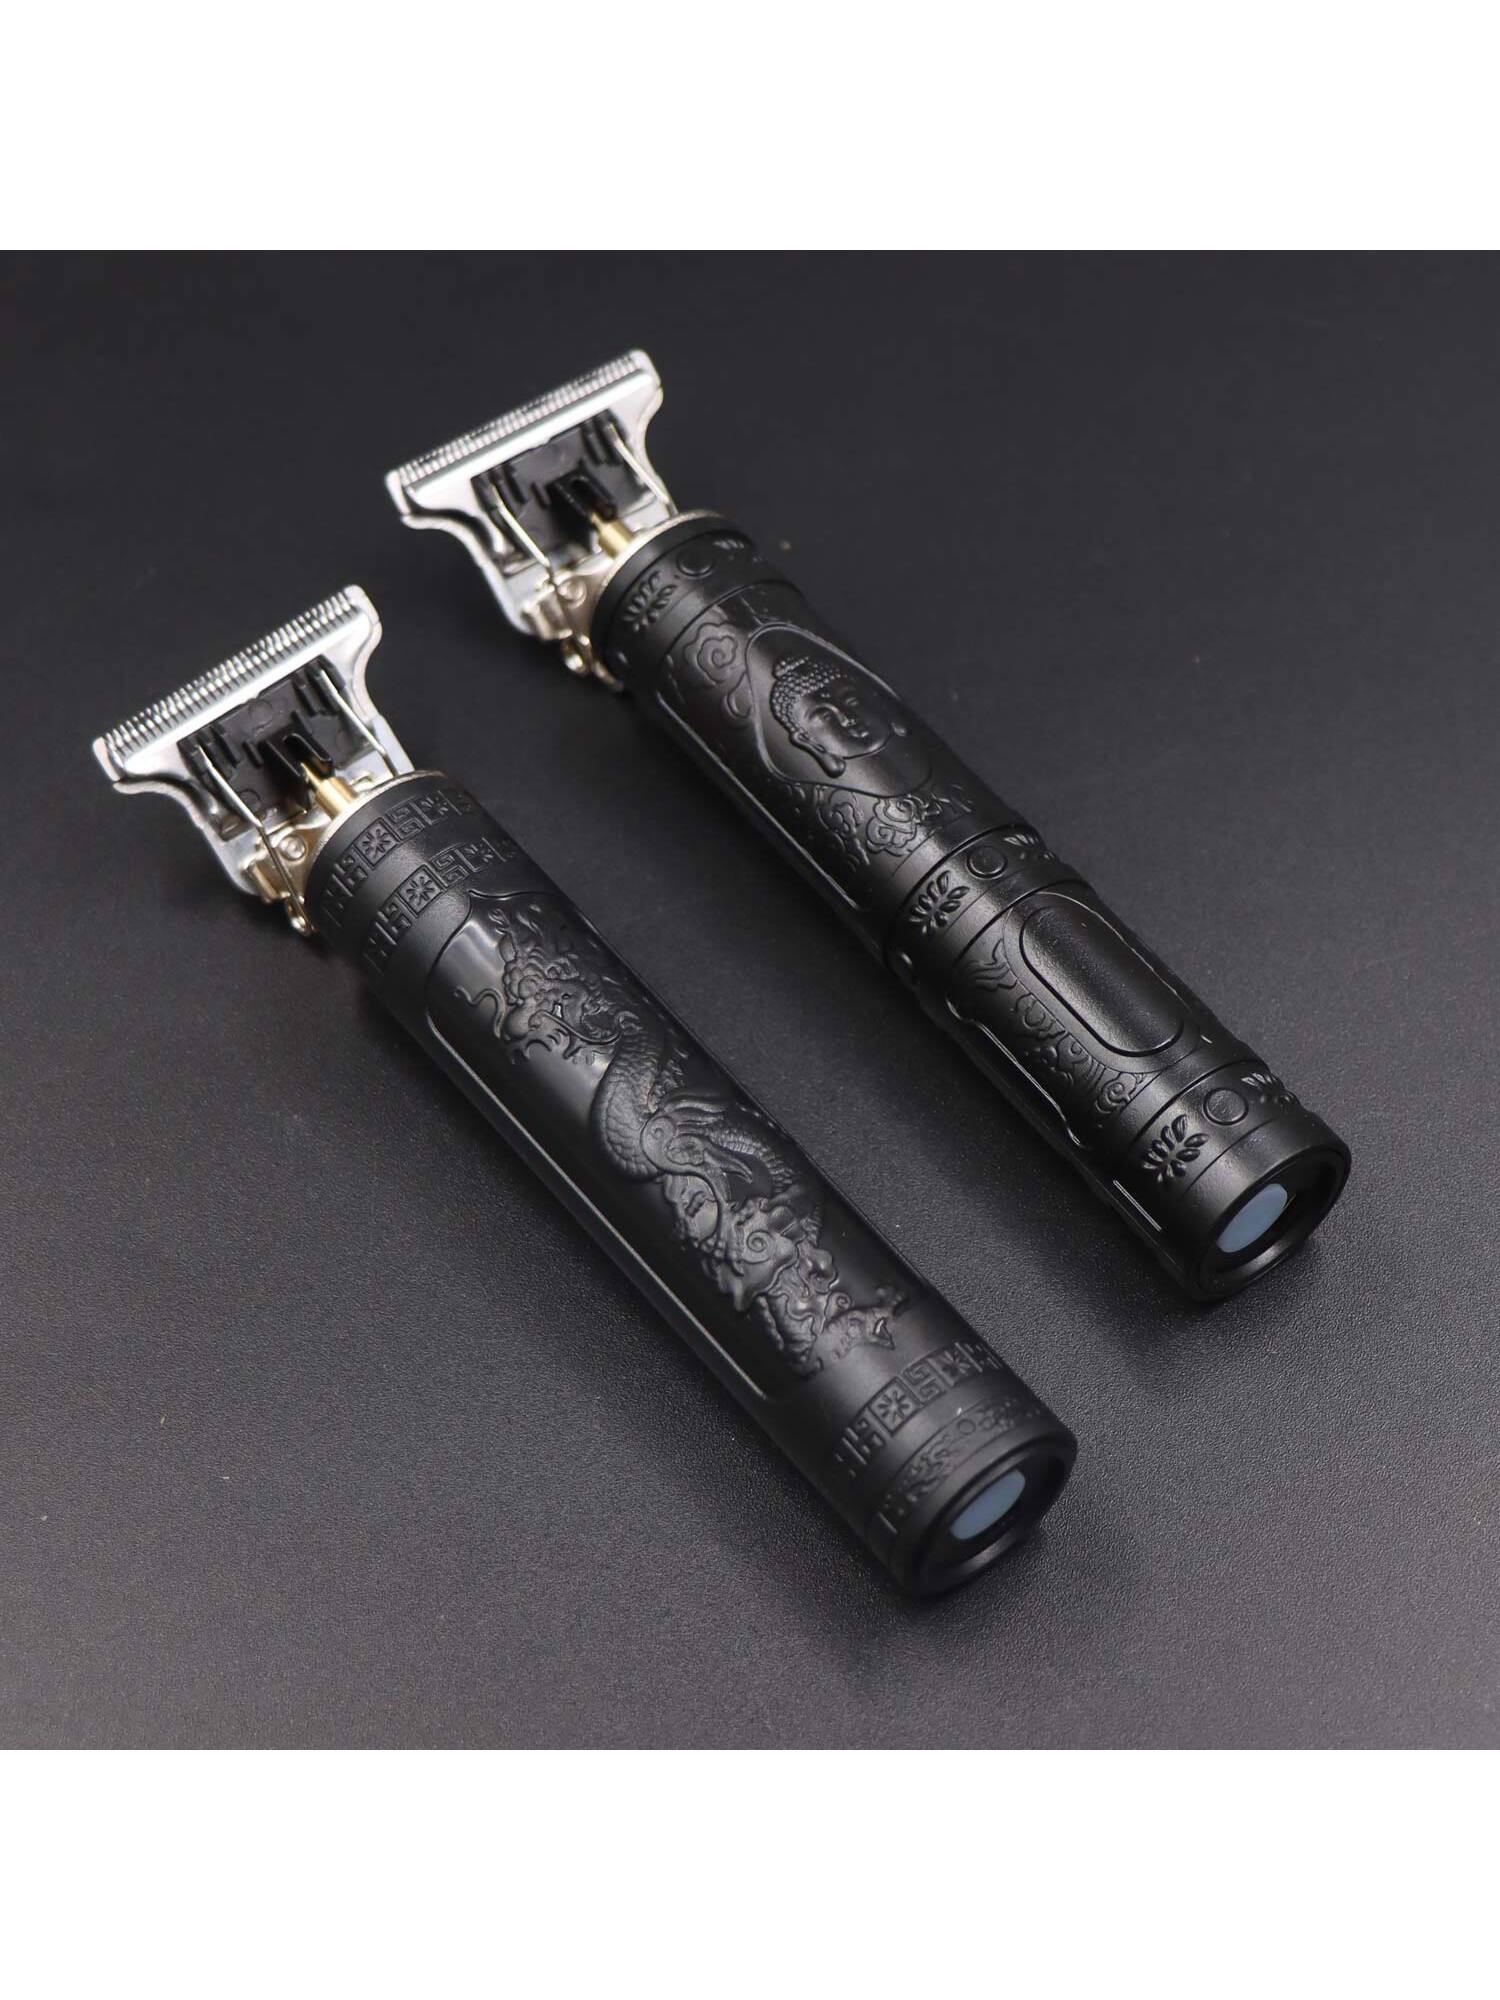 1set Plastic Usb Electric Rechargeable Hair Clipper & Shaver, Professional Beard Trimmer T9, Dragon And Phoenix Design, Suitable For Men's Hairdressers-X1 Dragon-6